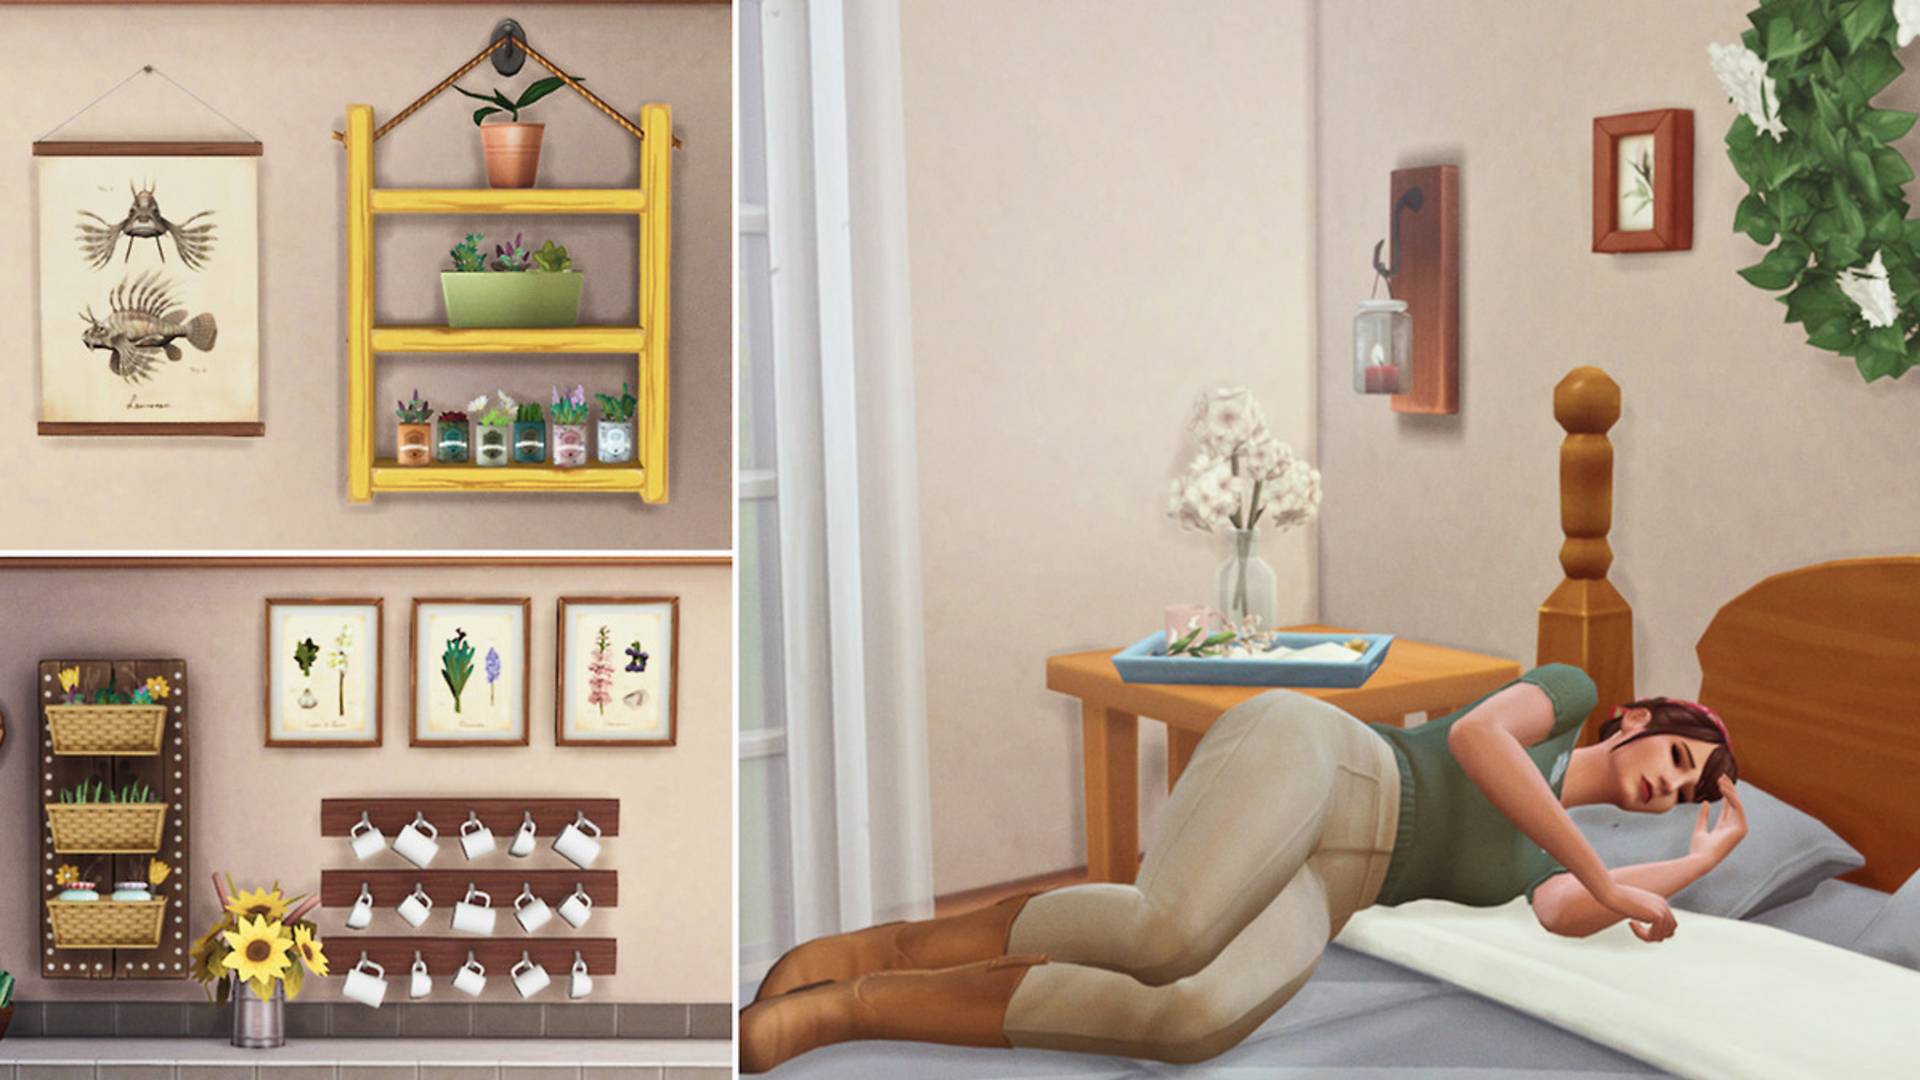 Sims 4 CC: Custom content including picture frames, a breakfast tray, floating mug rack, and flower boxes.